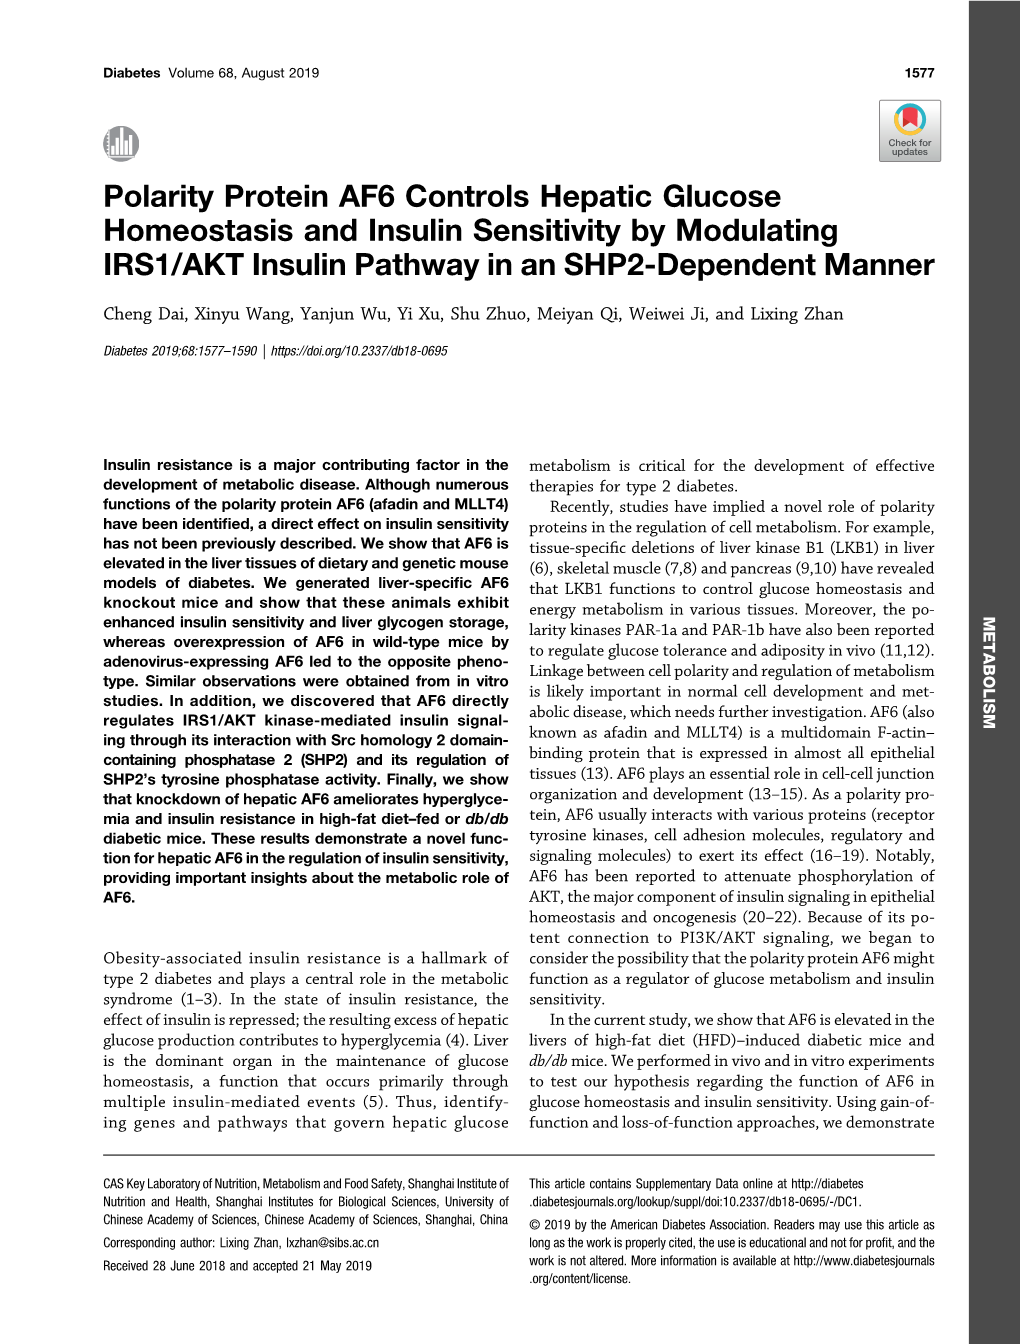 Polarity Protein AF6 Controls Hepatic Glucose Homeostasis and Insulin Sensitivity by Modulating IRS1/AKT Insulin Pathway in an SHP2-Dependent Manner